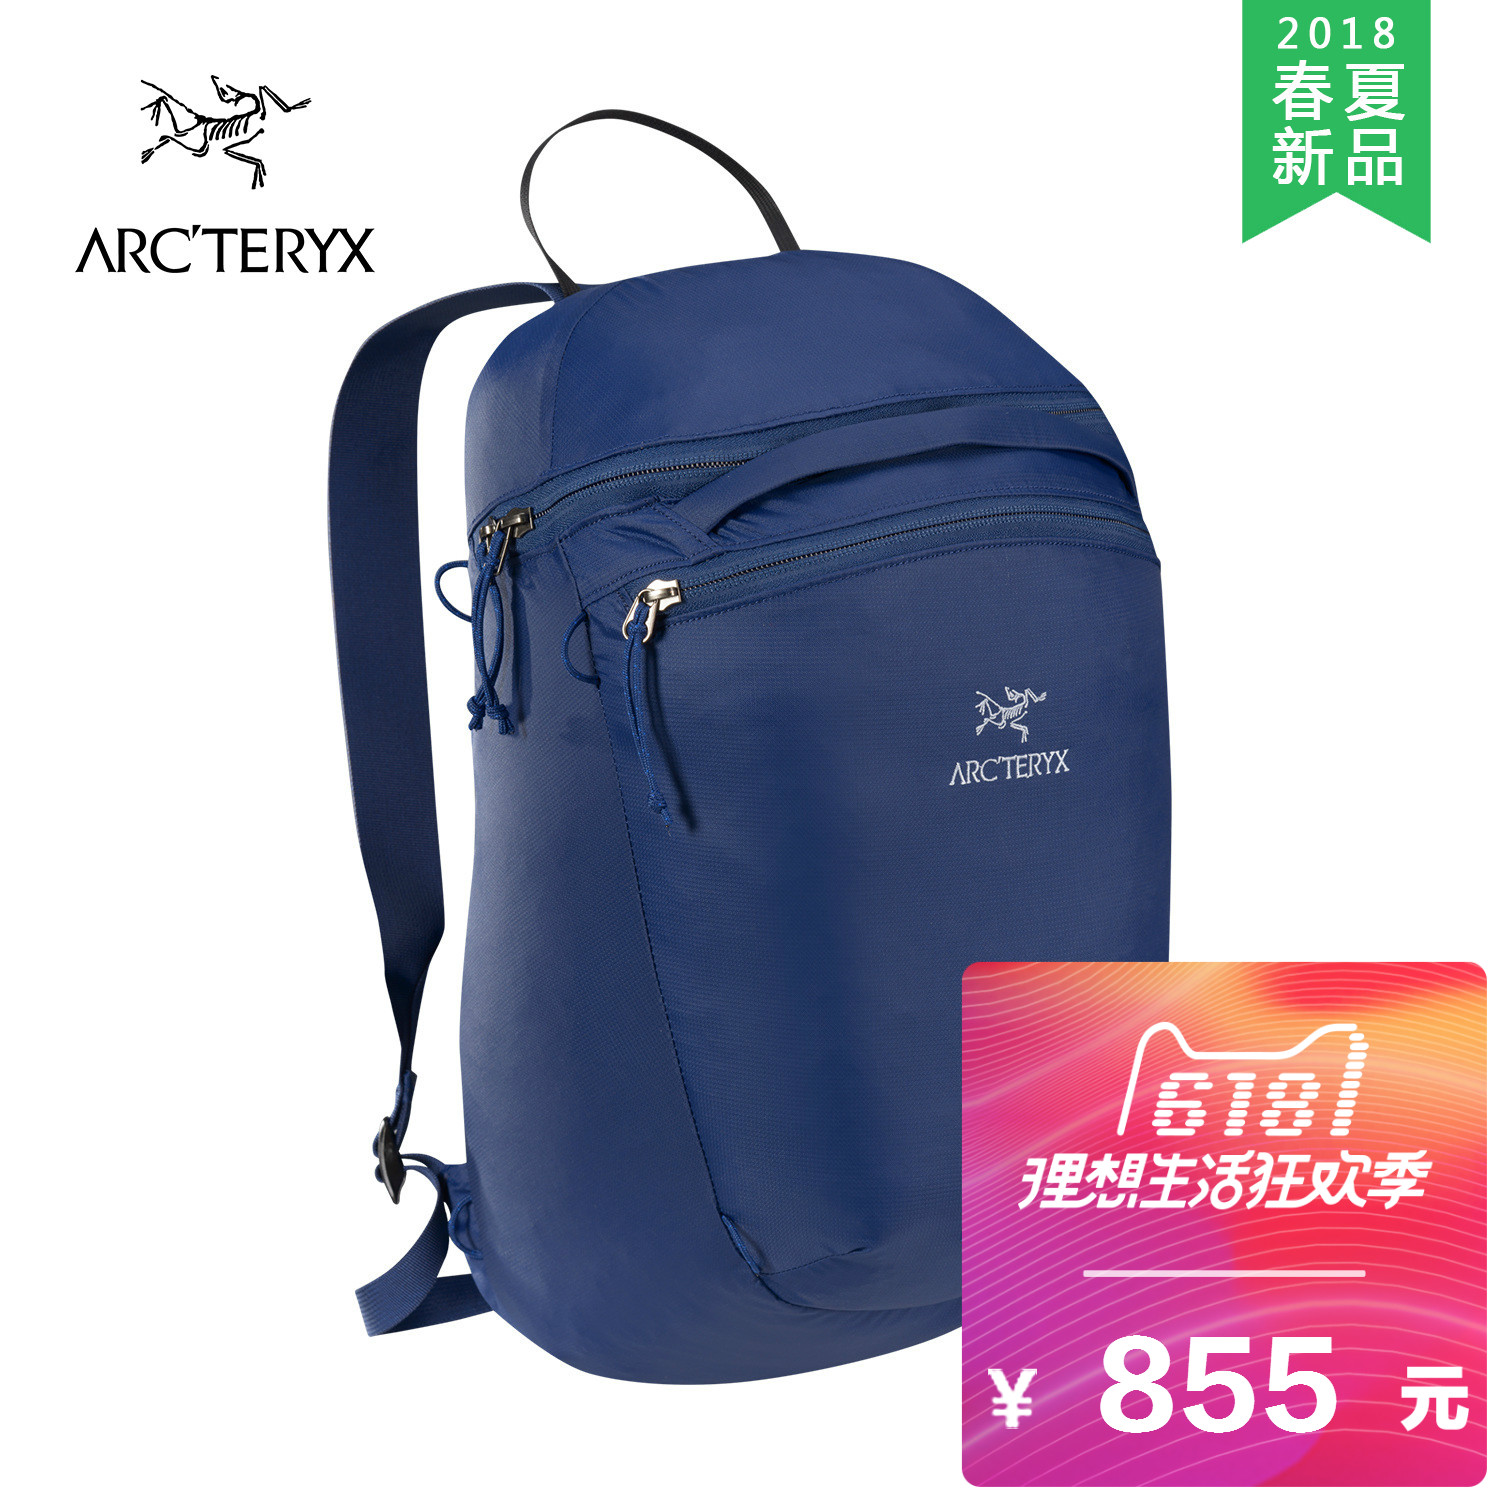 ARCTERYX/Archaeopteryx 15L Compressible Lightweight Comfortable Wear-Resistant Daily Backpack Index 18283